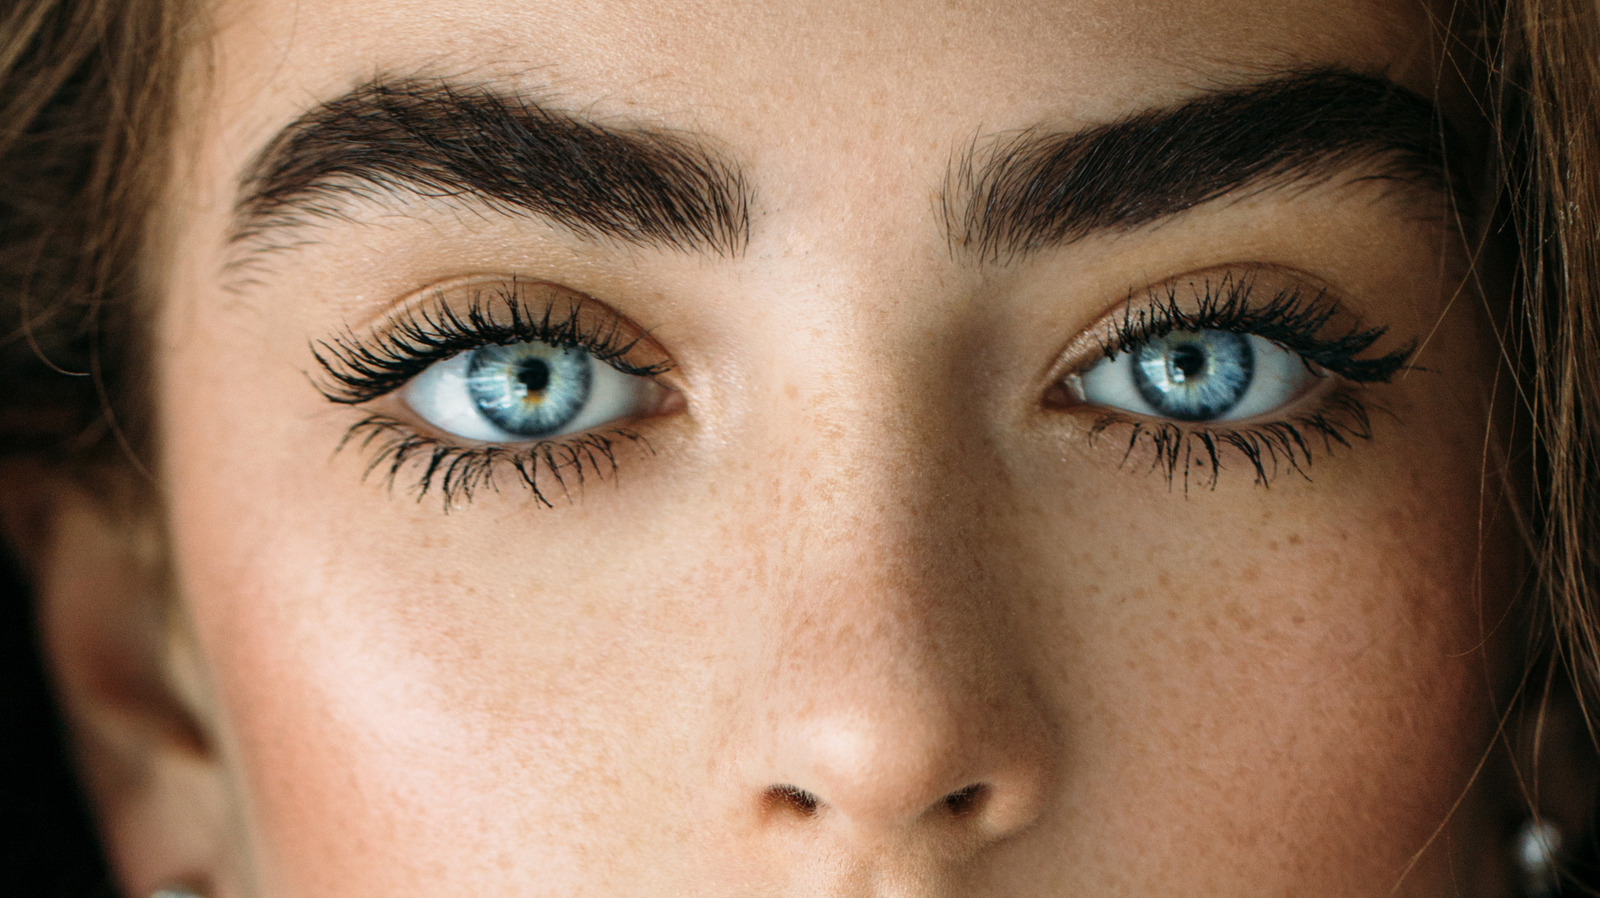 What Is The Viral Blue Eye Theory - And Do Some Eye Colors Make